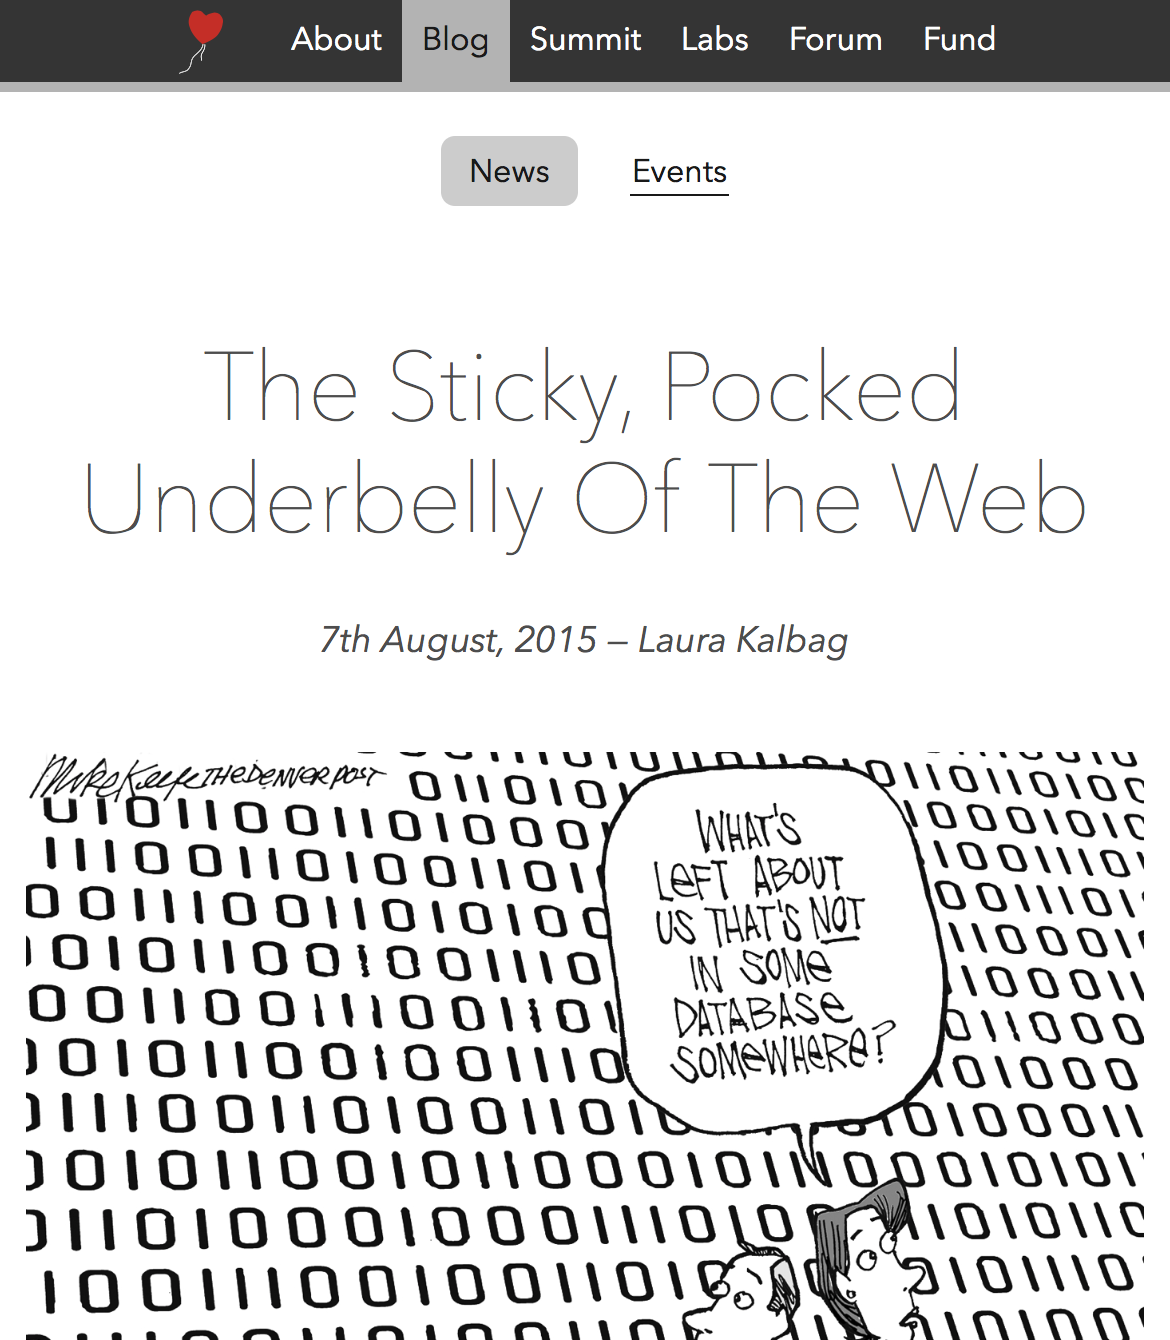 Screenshot of the Ind.ie blog roundup The Sticky, Pocked Underbelly Of The Web